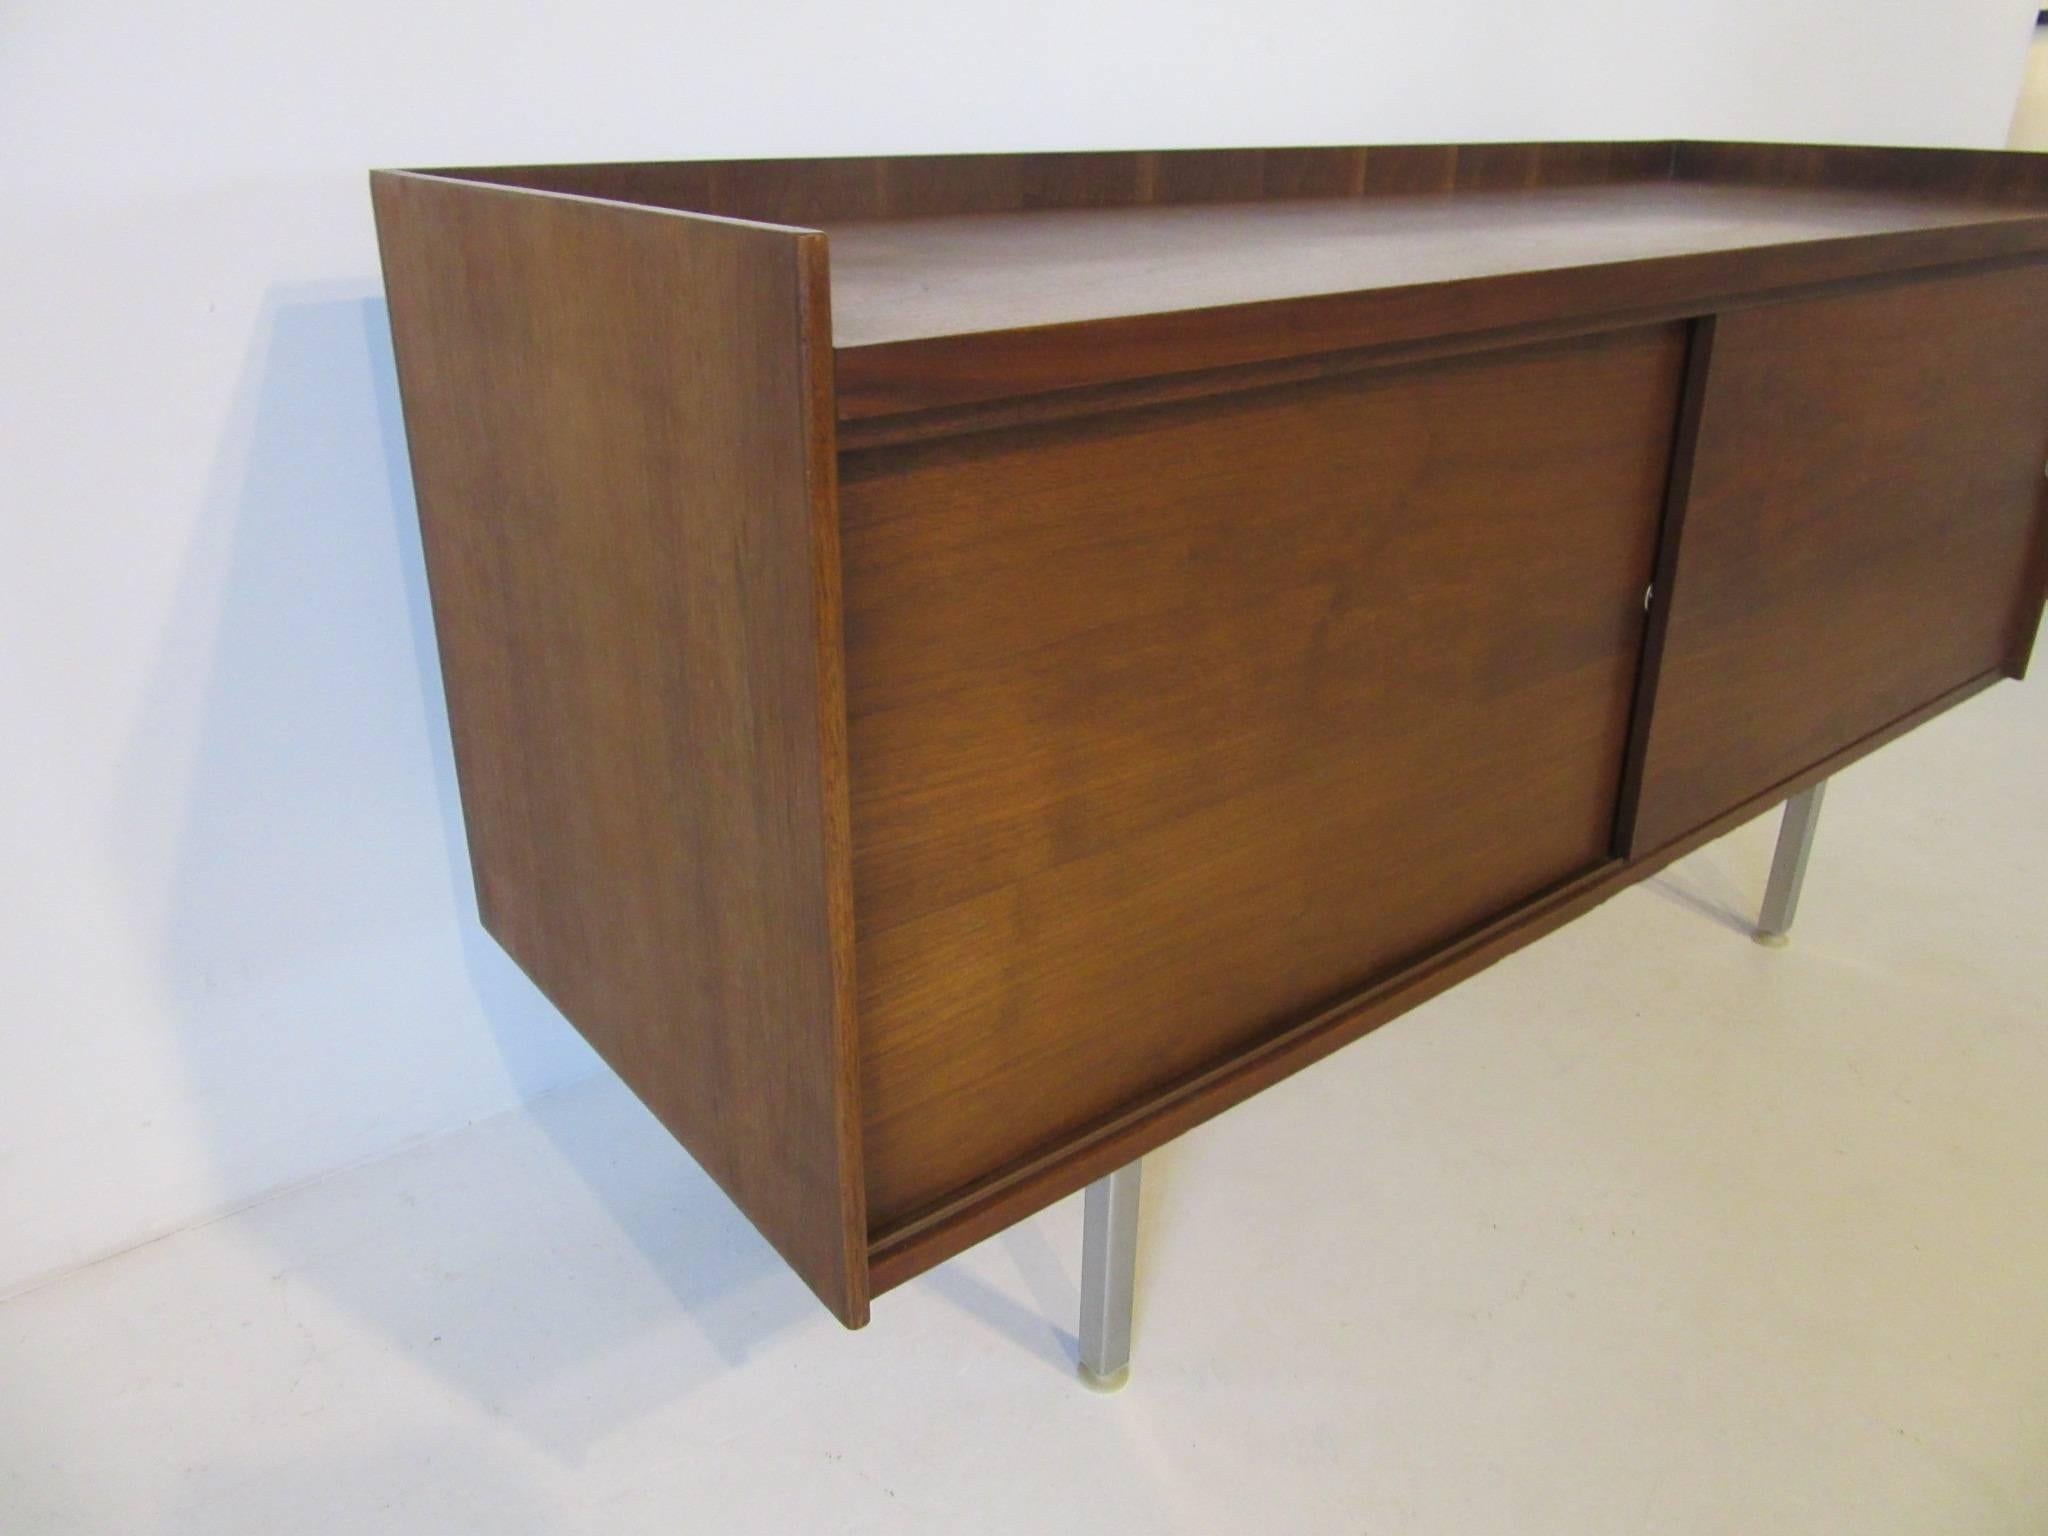 A smaller sized walnut credenza with double sliding doors, an adjustable shelve to each side and raised top edge all sitting on stainless legs. Designed in the style of George Nelson and Jens Risom.